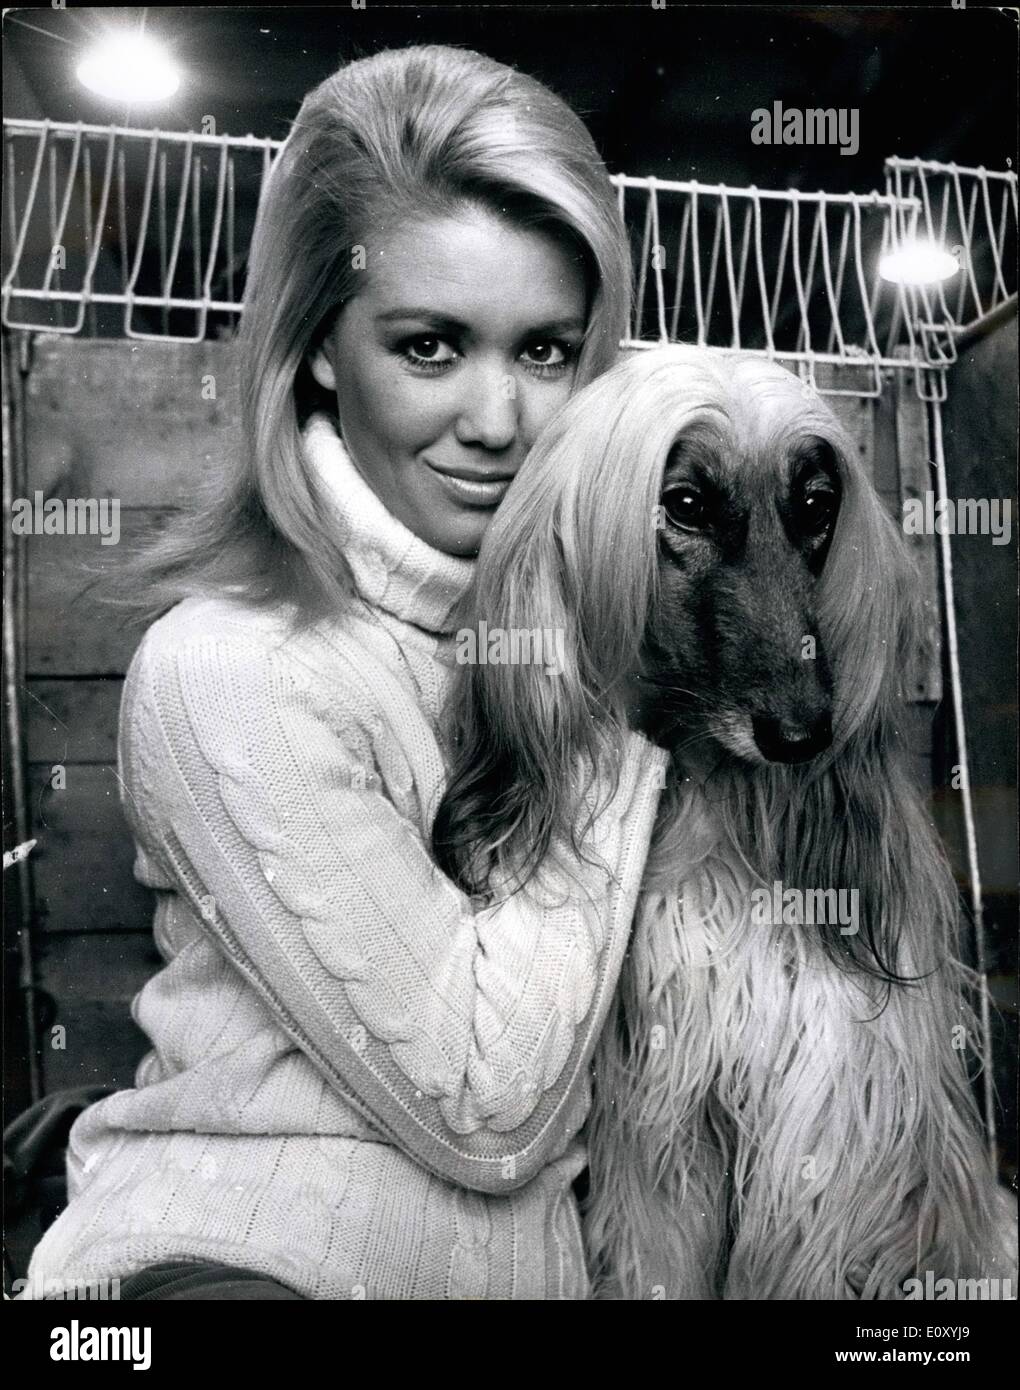 Feb. 02, 1968 - Similar Hair styles seen at Cruft's - the Biggest Dog Show in the world: This year there is a record entry of 7,017 dogs at Cruft's, the biggest dog show in the world, now being held at Olympia. After the judging about 500,000-worth of them will be exported. Photo shows Pretty actress Annette Andre, 23, makes a charming picture as she poses with similar-hair -do as ''Karib'', an Afghan Hound entered for the show by her friend, Mrs. Race, of Wemhley Park, Middlesex. Stock Photo